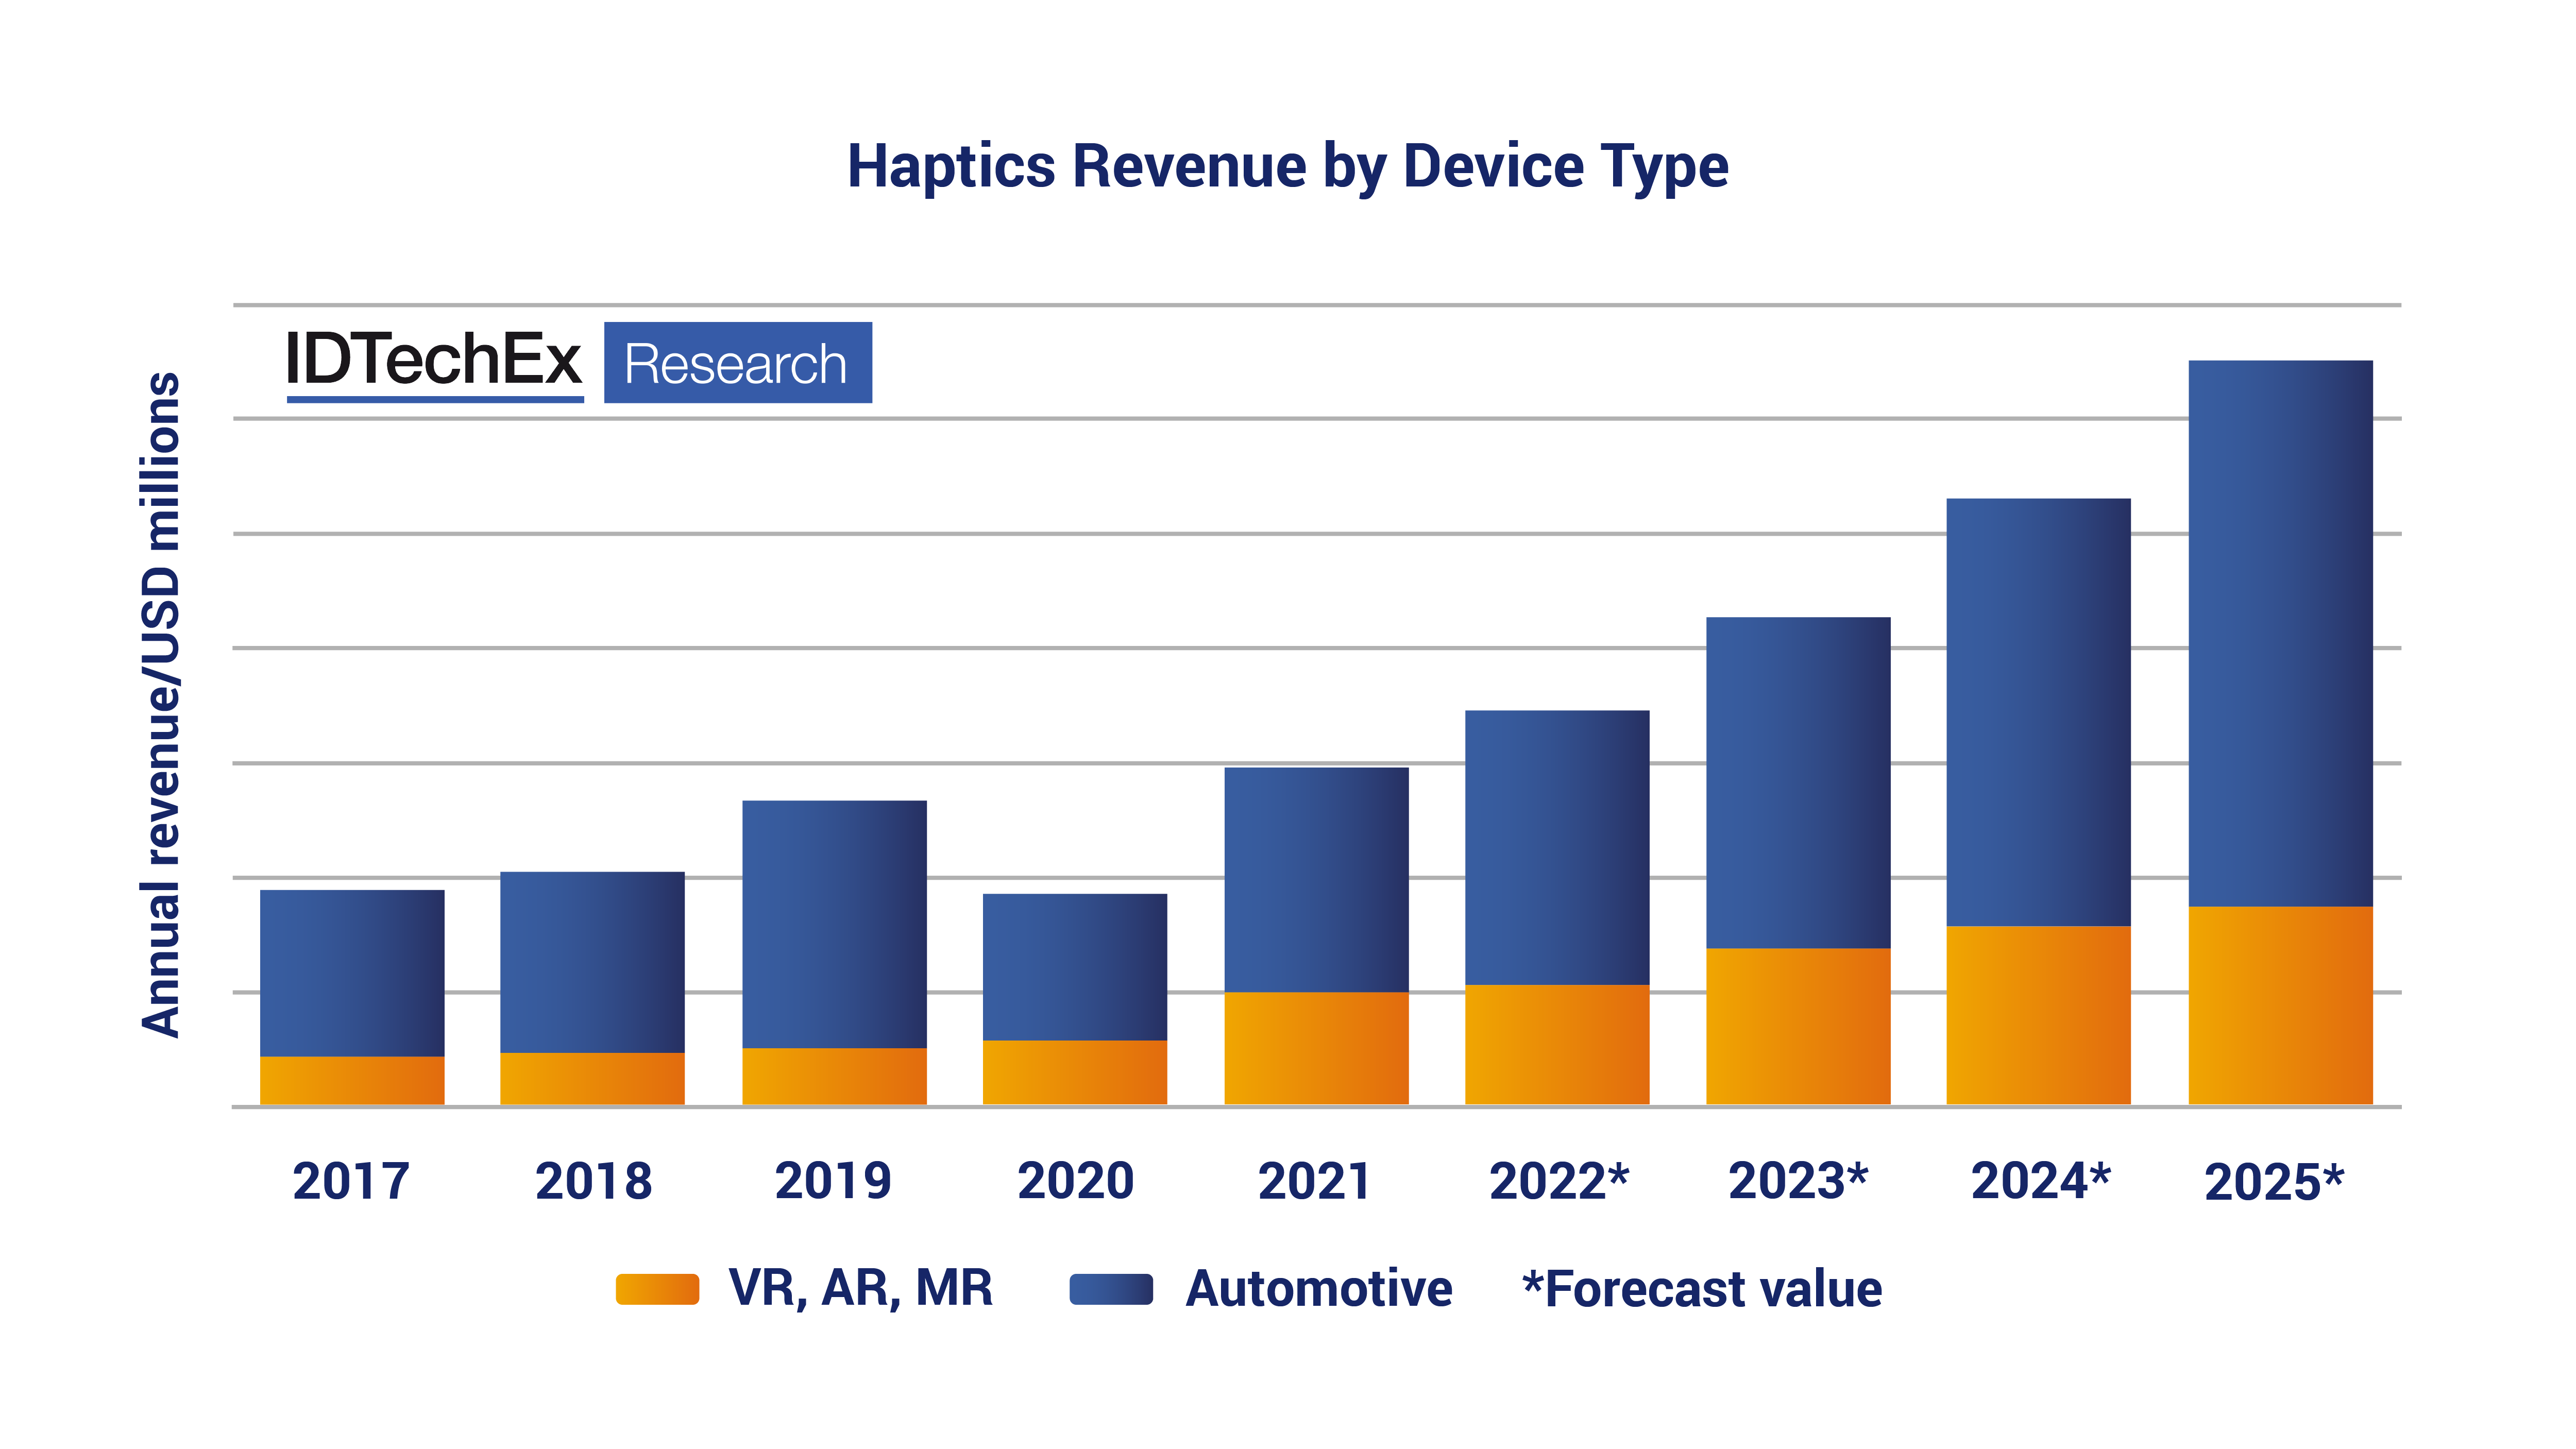 Historic data and forecasts of haptics revenue for XR and automotive, showing promising market growth over the next decade. Full data is included in the report. Source: IDTechEx - “Haptics 2023-2033: Technologies, Markets and Players”